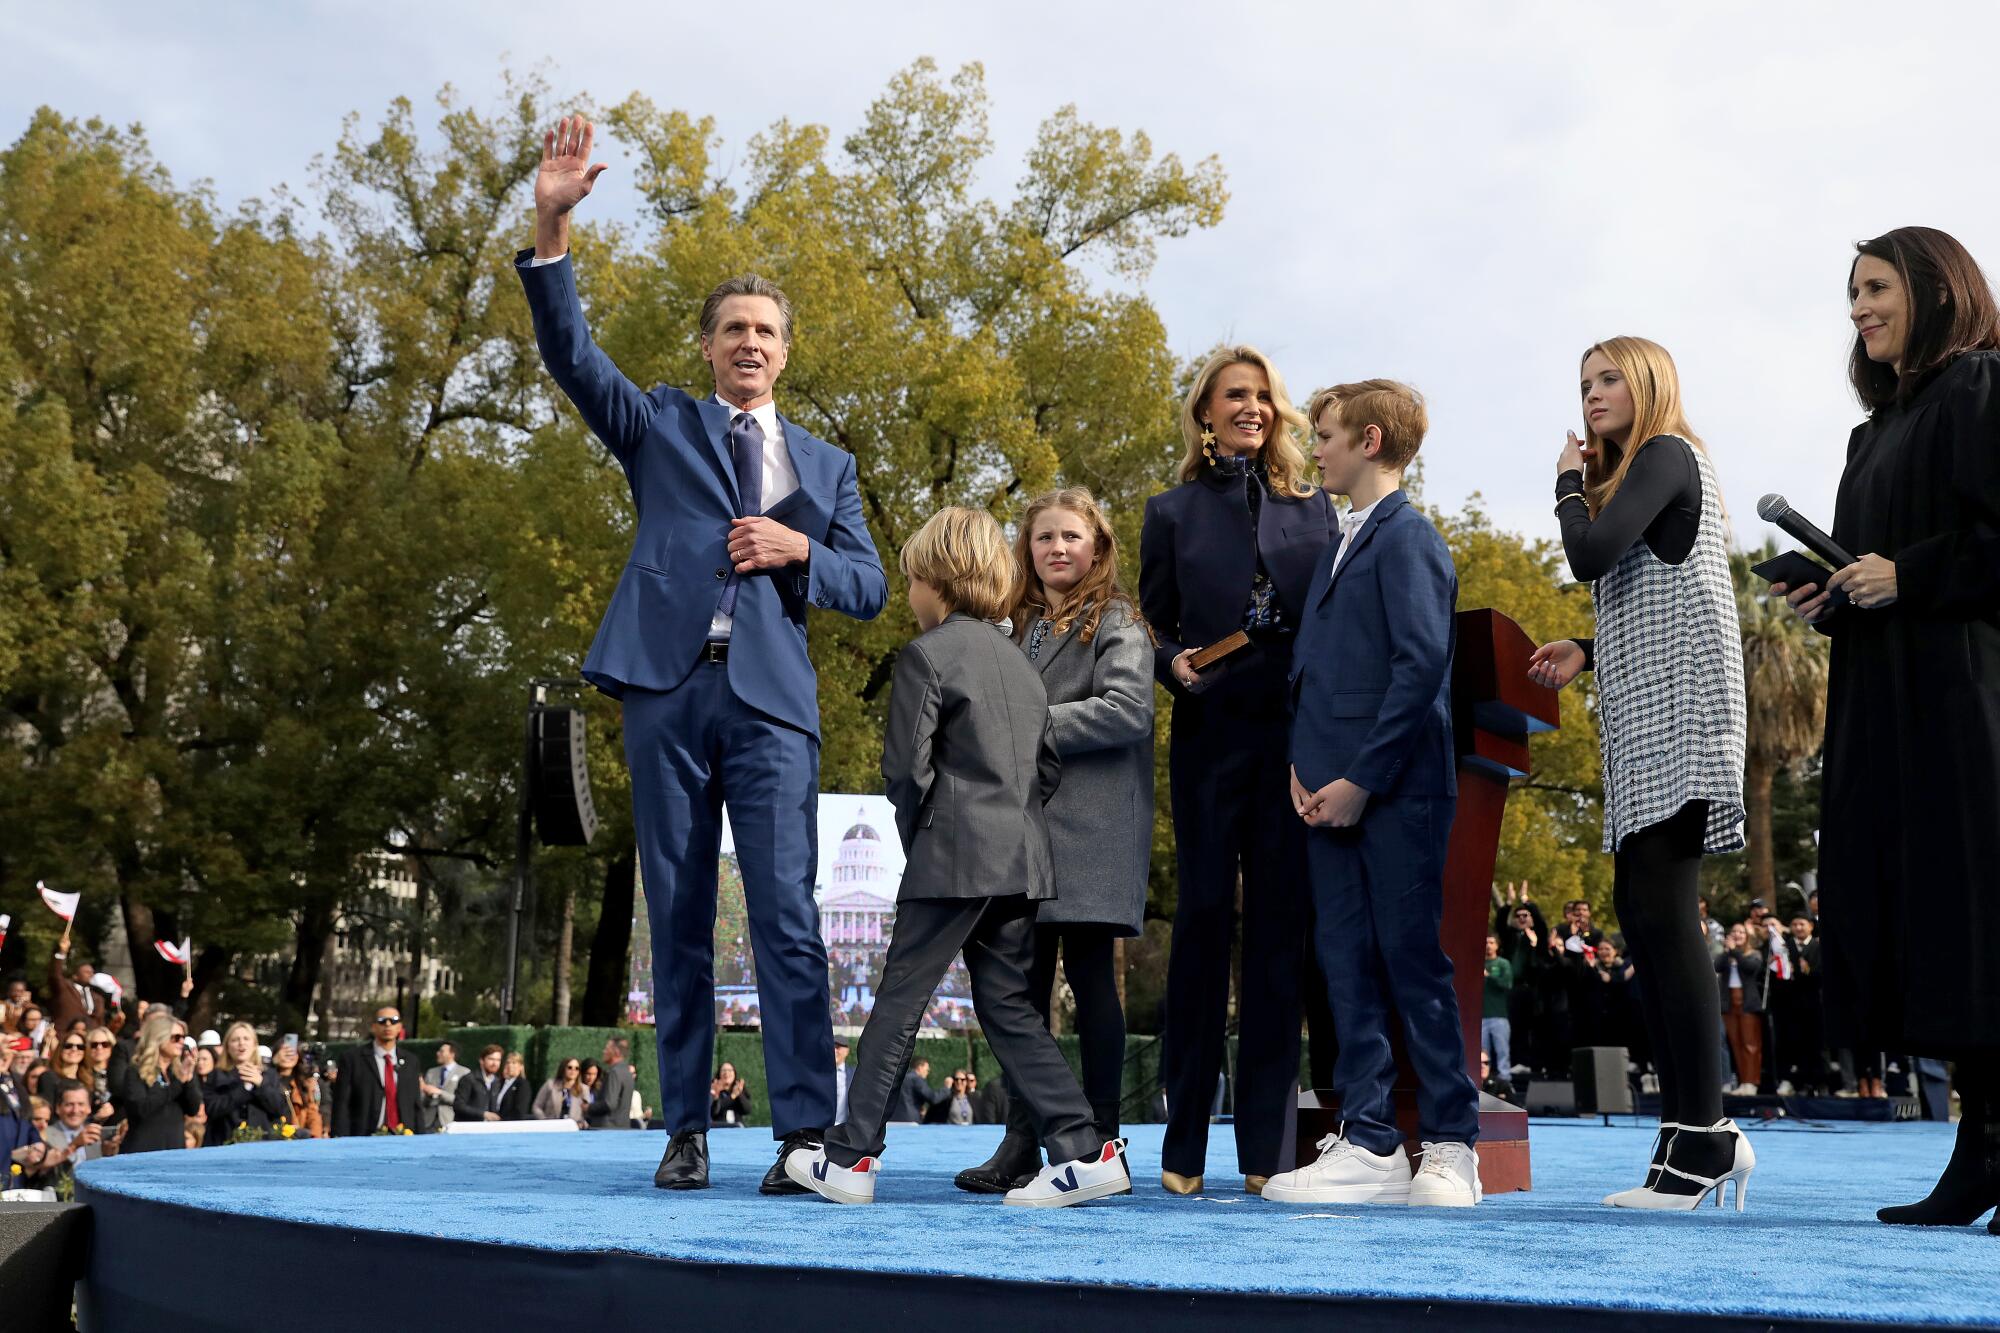 Gov. Gavin Newsom waves from stage with his family.